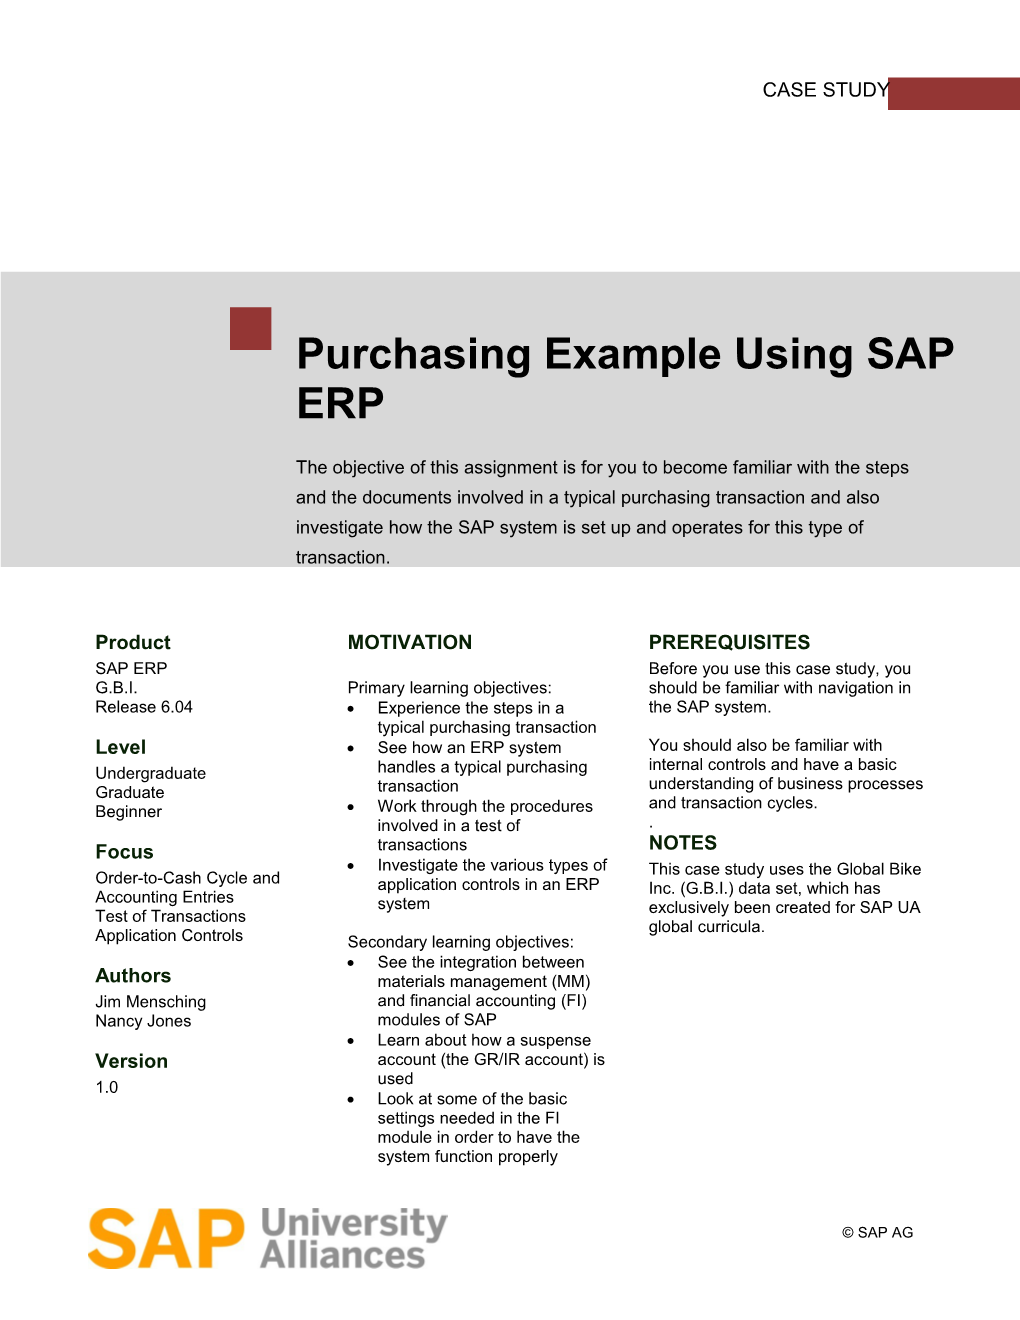 Experience the Steps in a Typical Purchasing Transaction